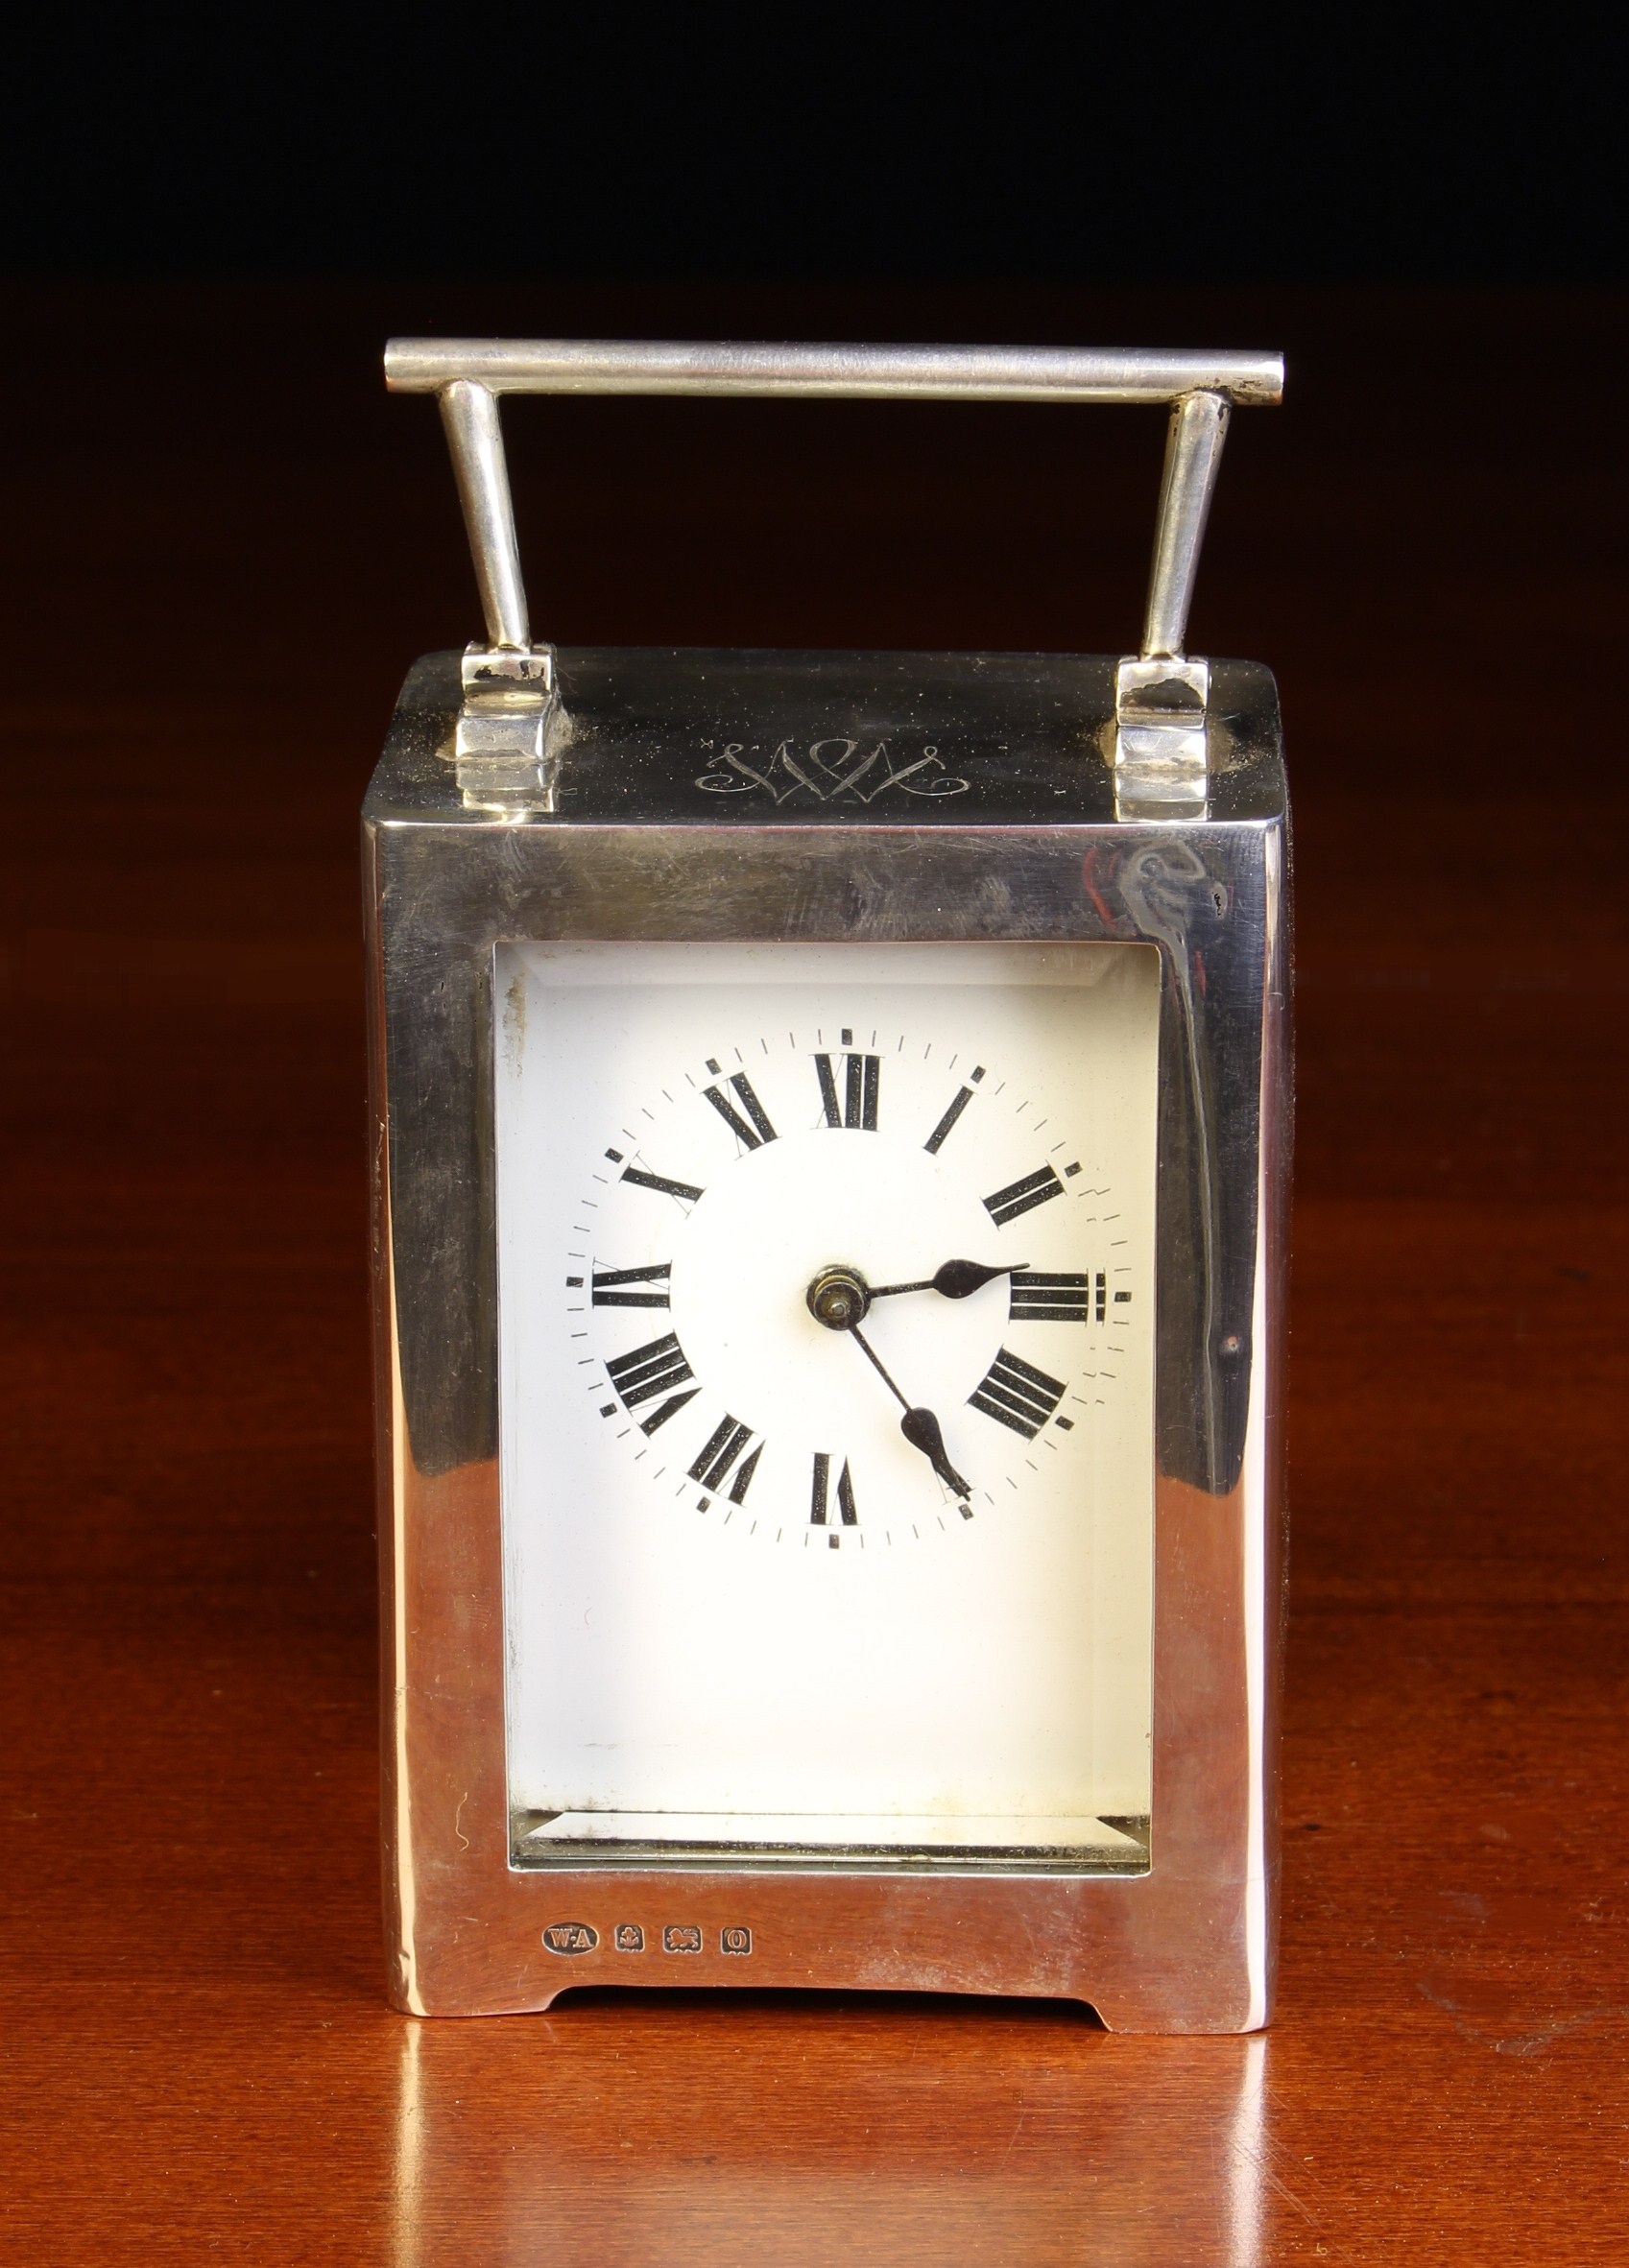 A Cased Silver Carriage Clock by William Aitken hallmarked Birmingham 1913 with a French movement.